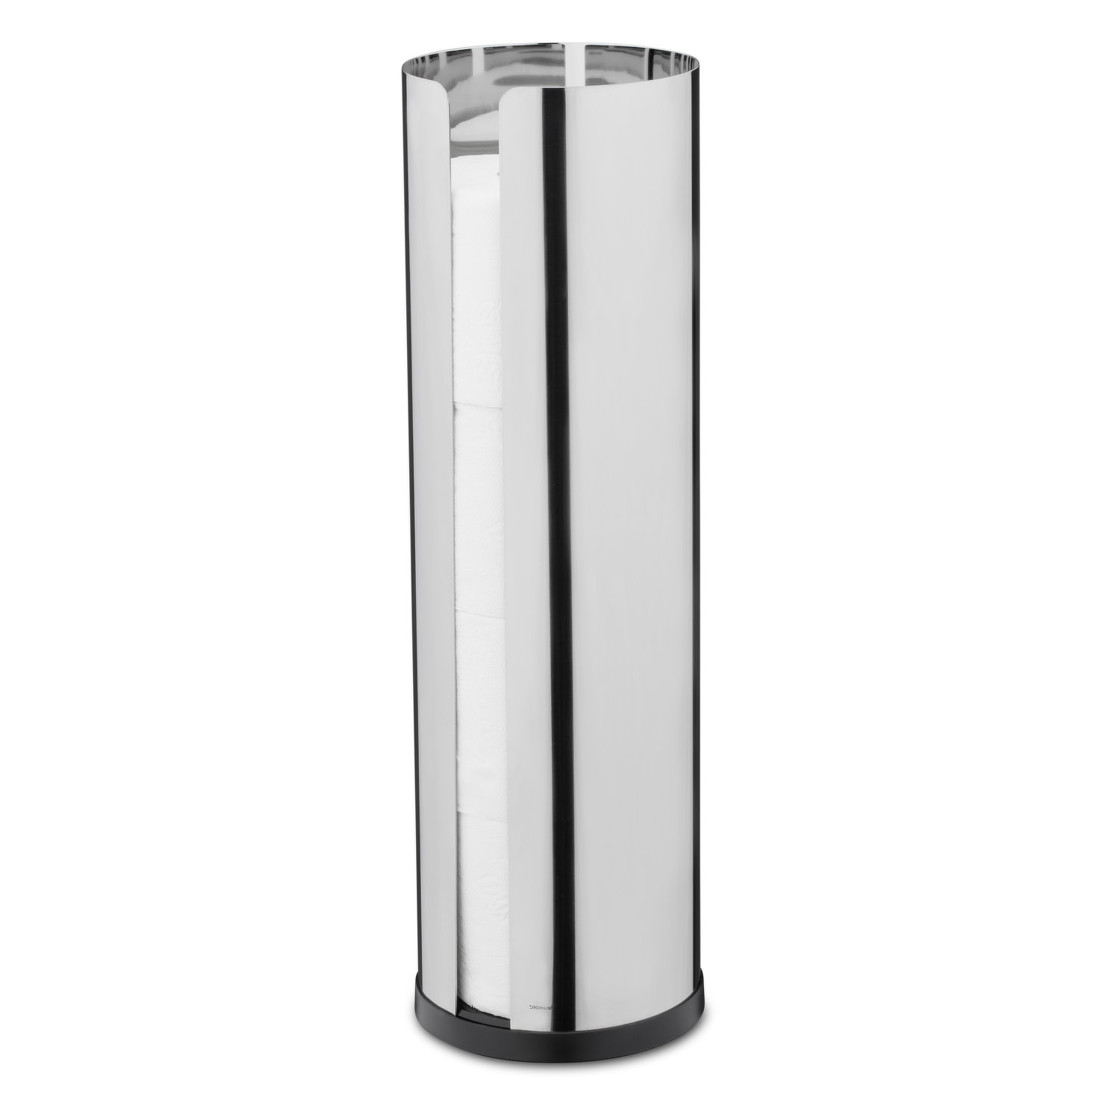 Toilet paper holder, 4-roll polished stainless steel NEXIO - Blomus